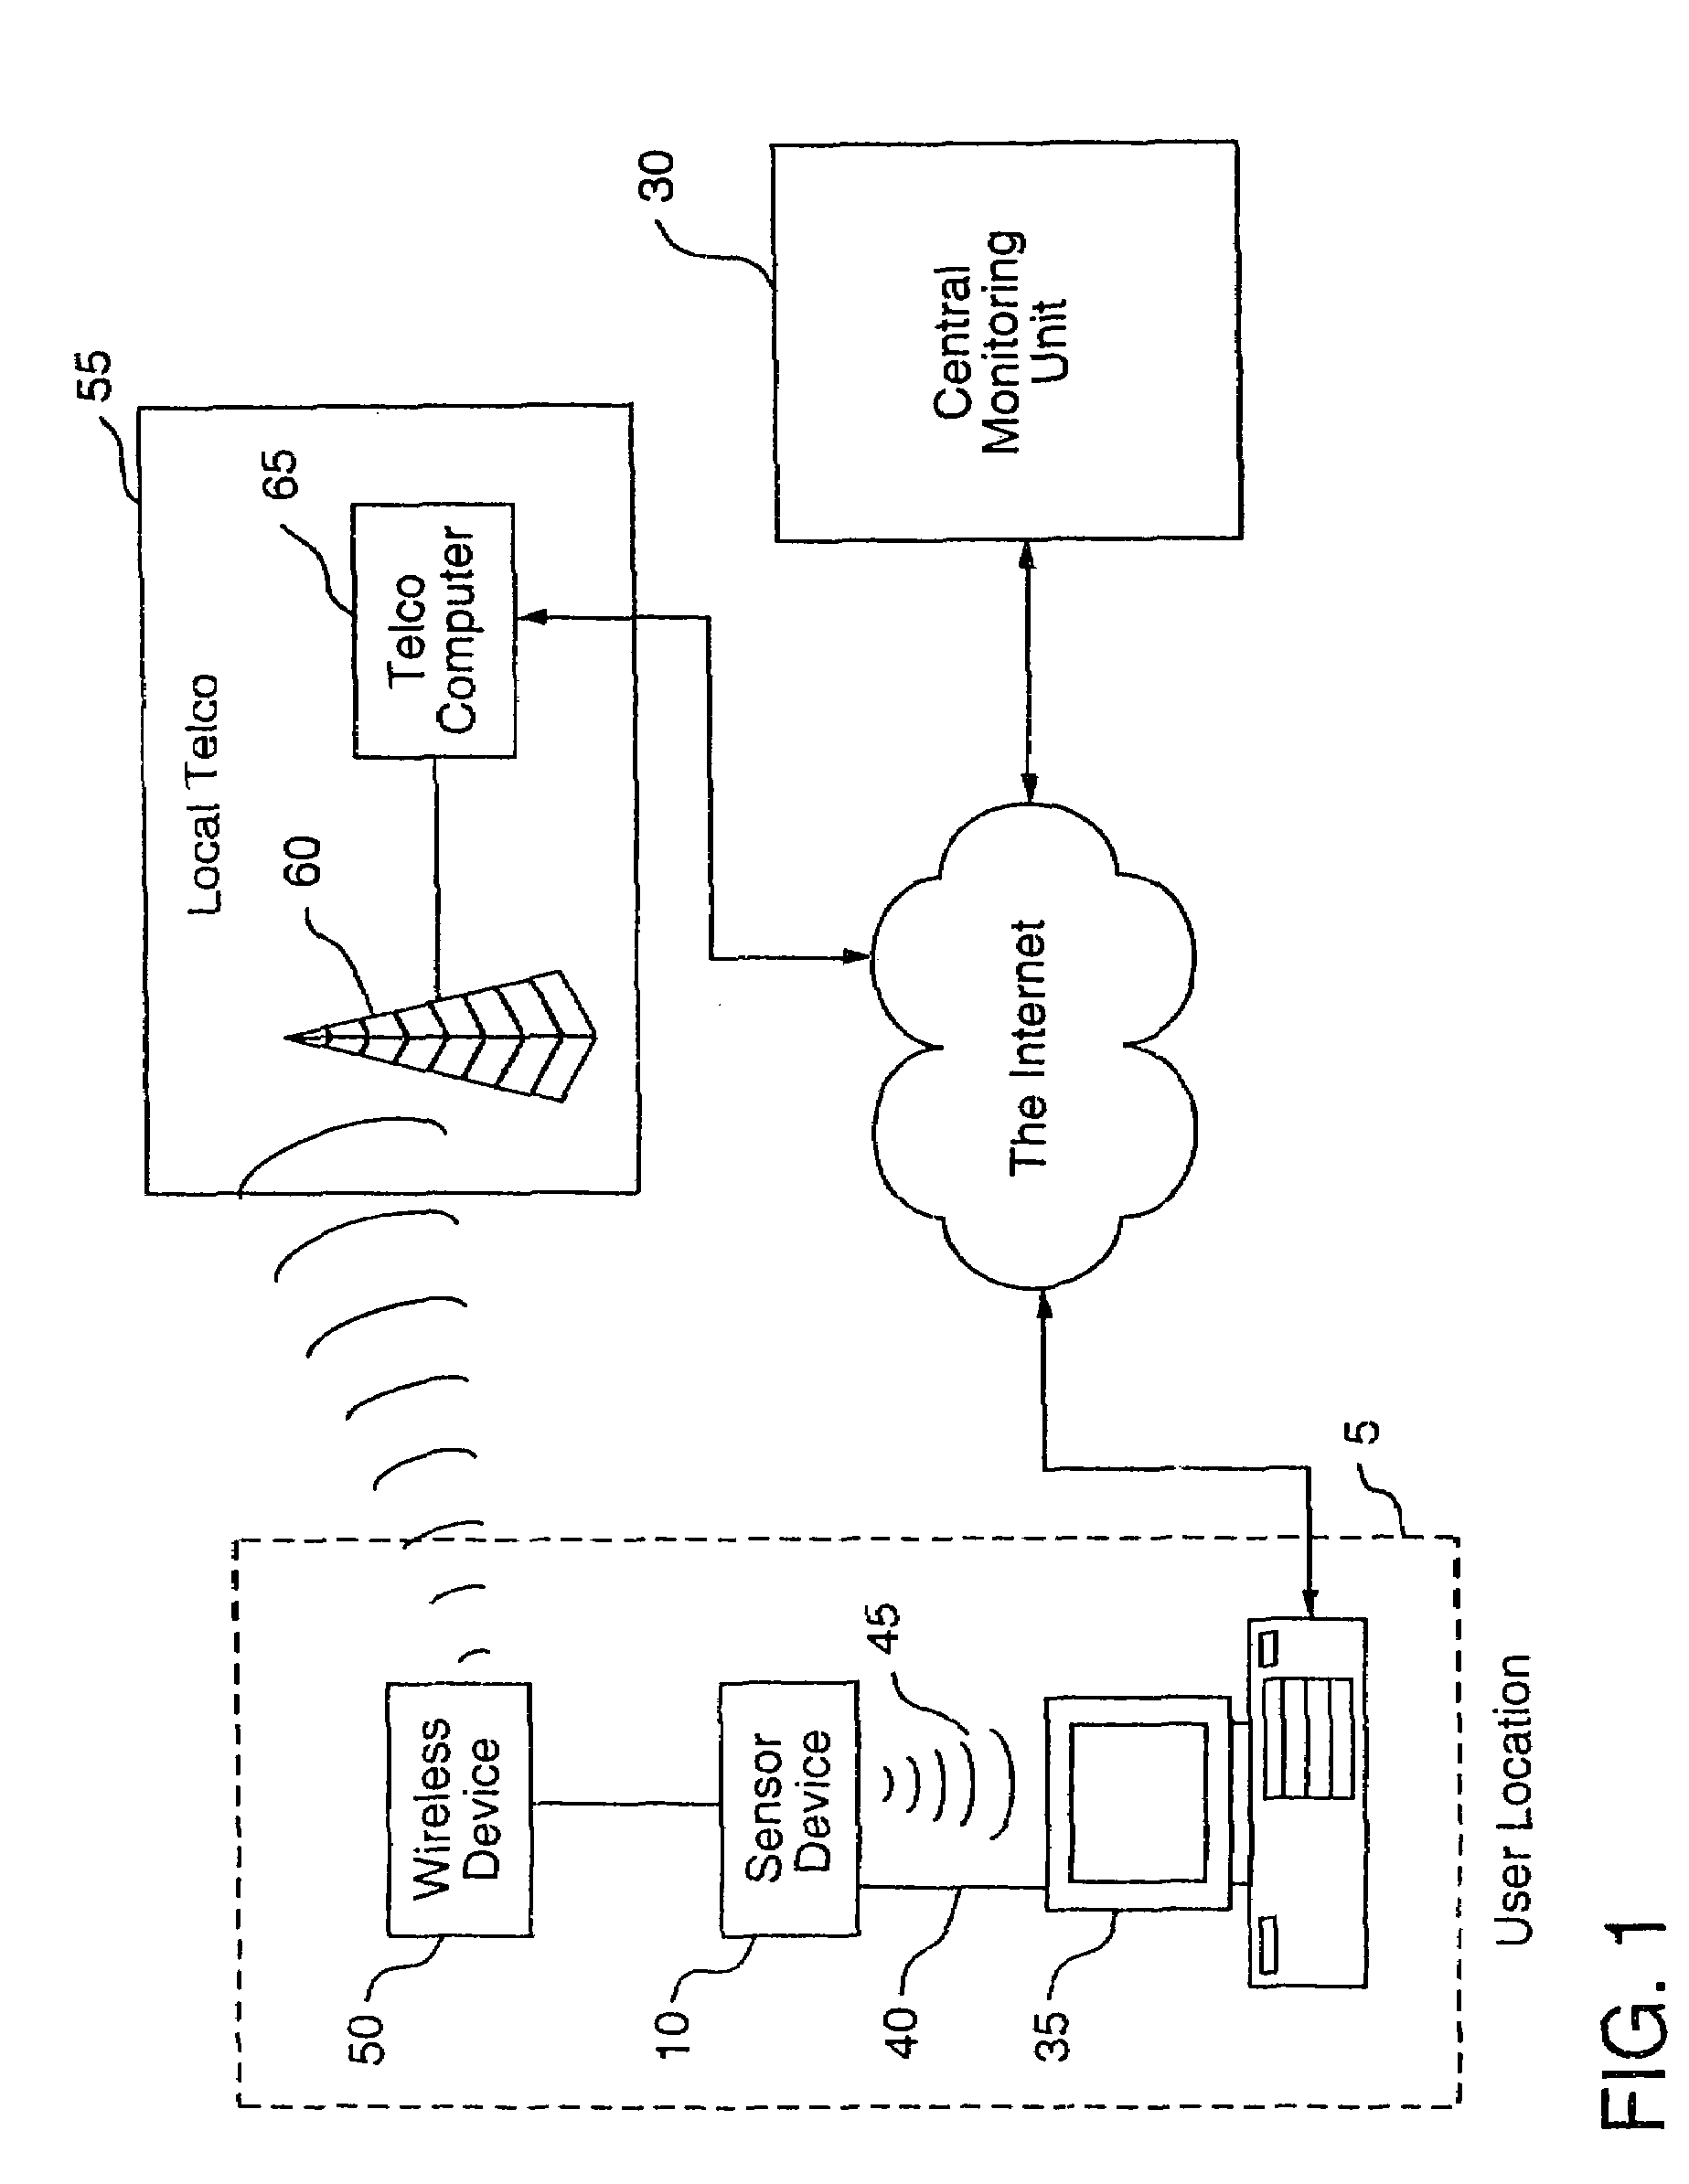 Apparatus for detecting, receiving, deriving and displaying human physiological and contextual information